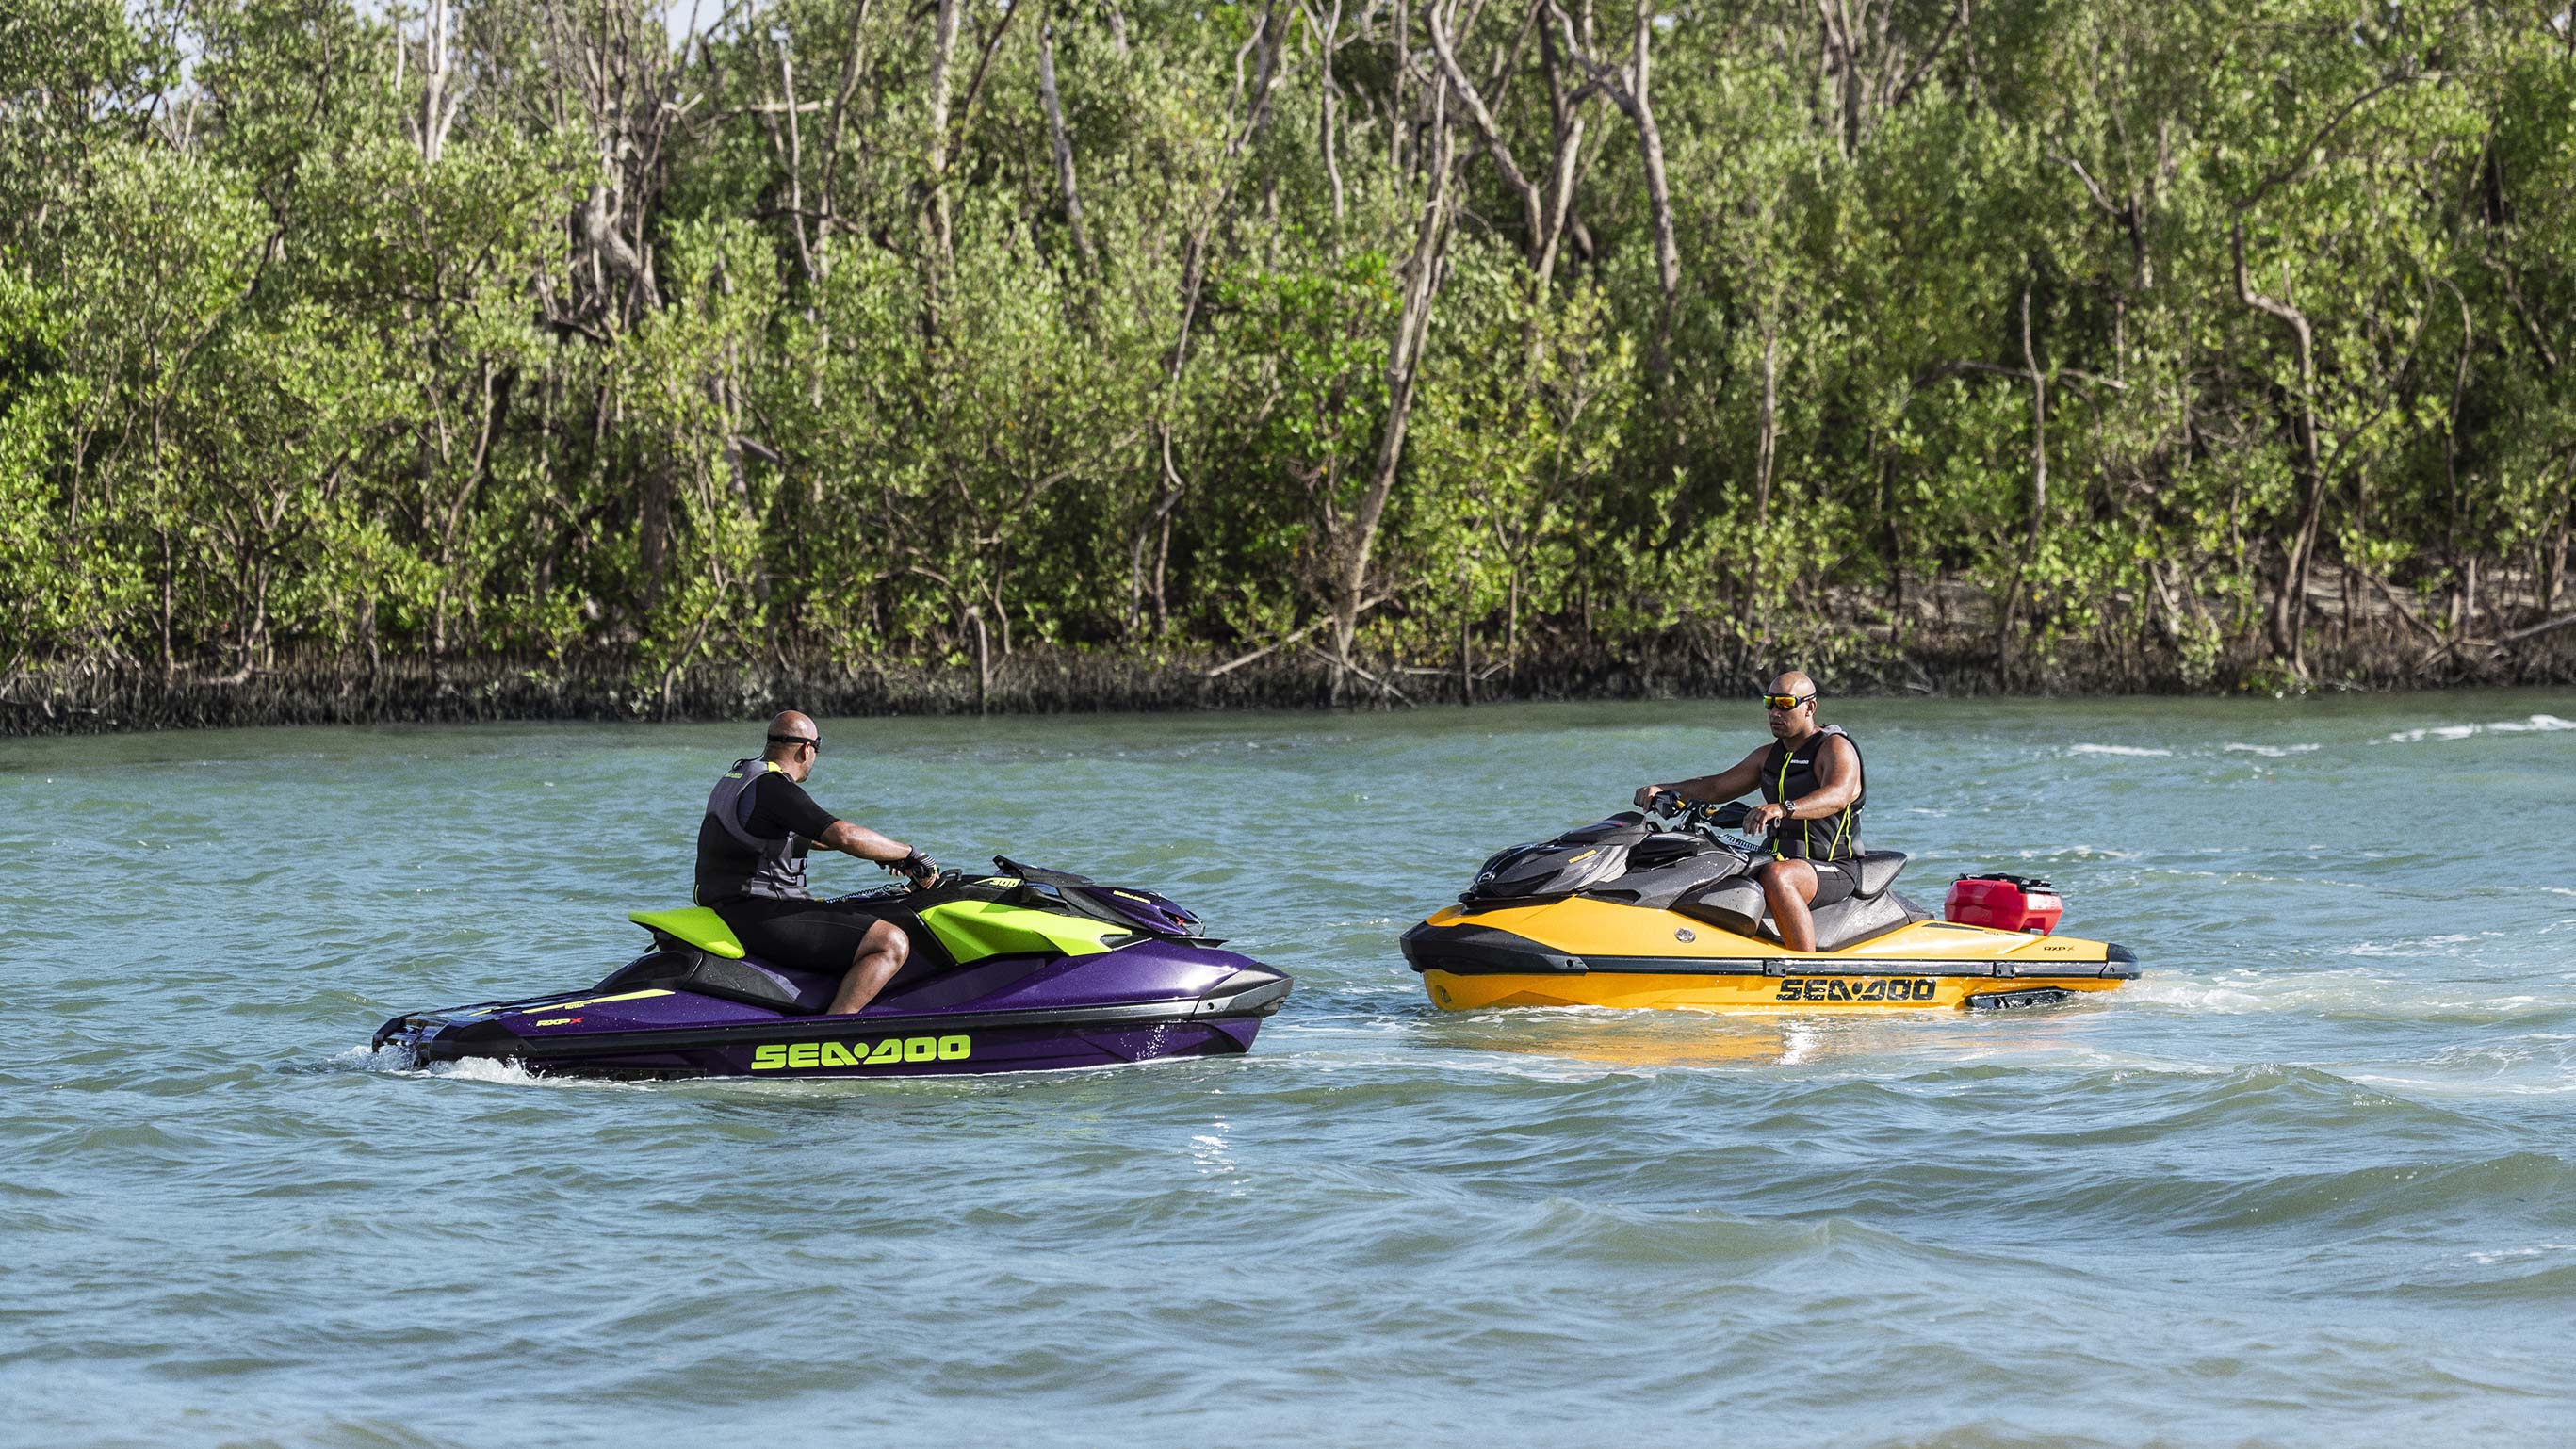 Two Sea-Doo RXP-X face to face